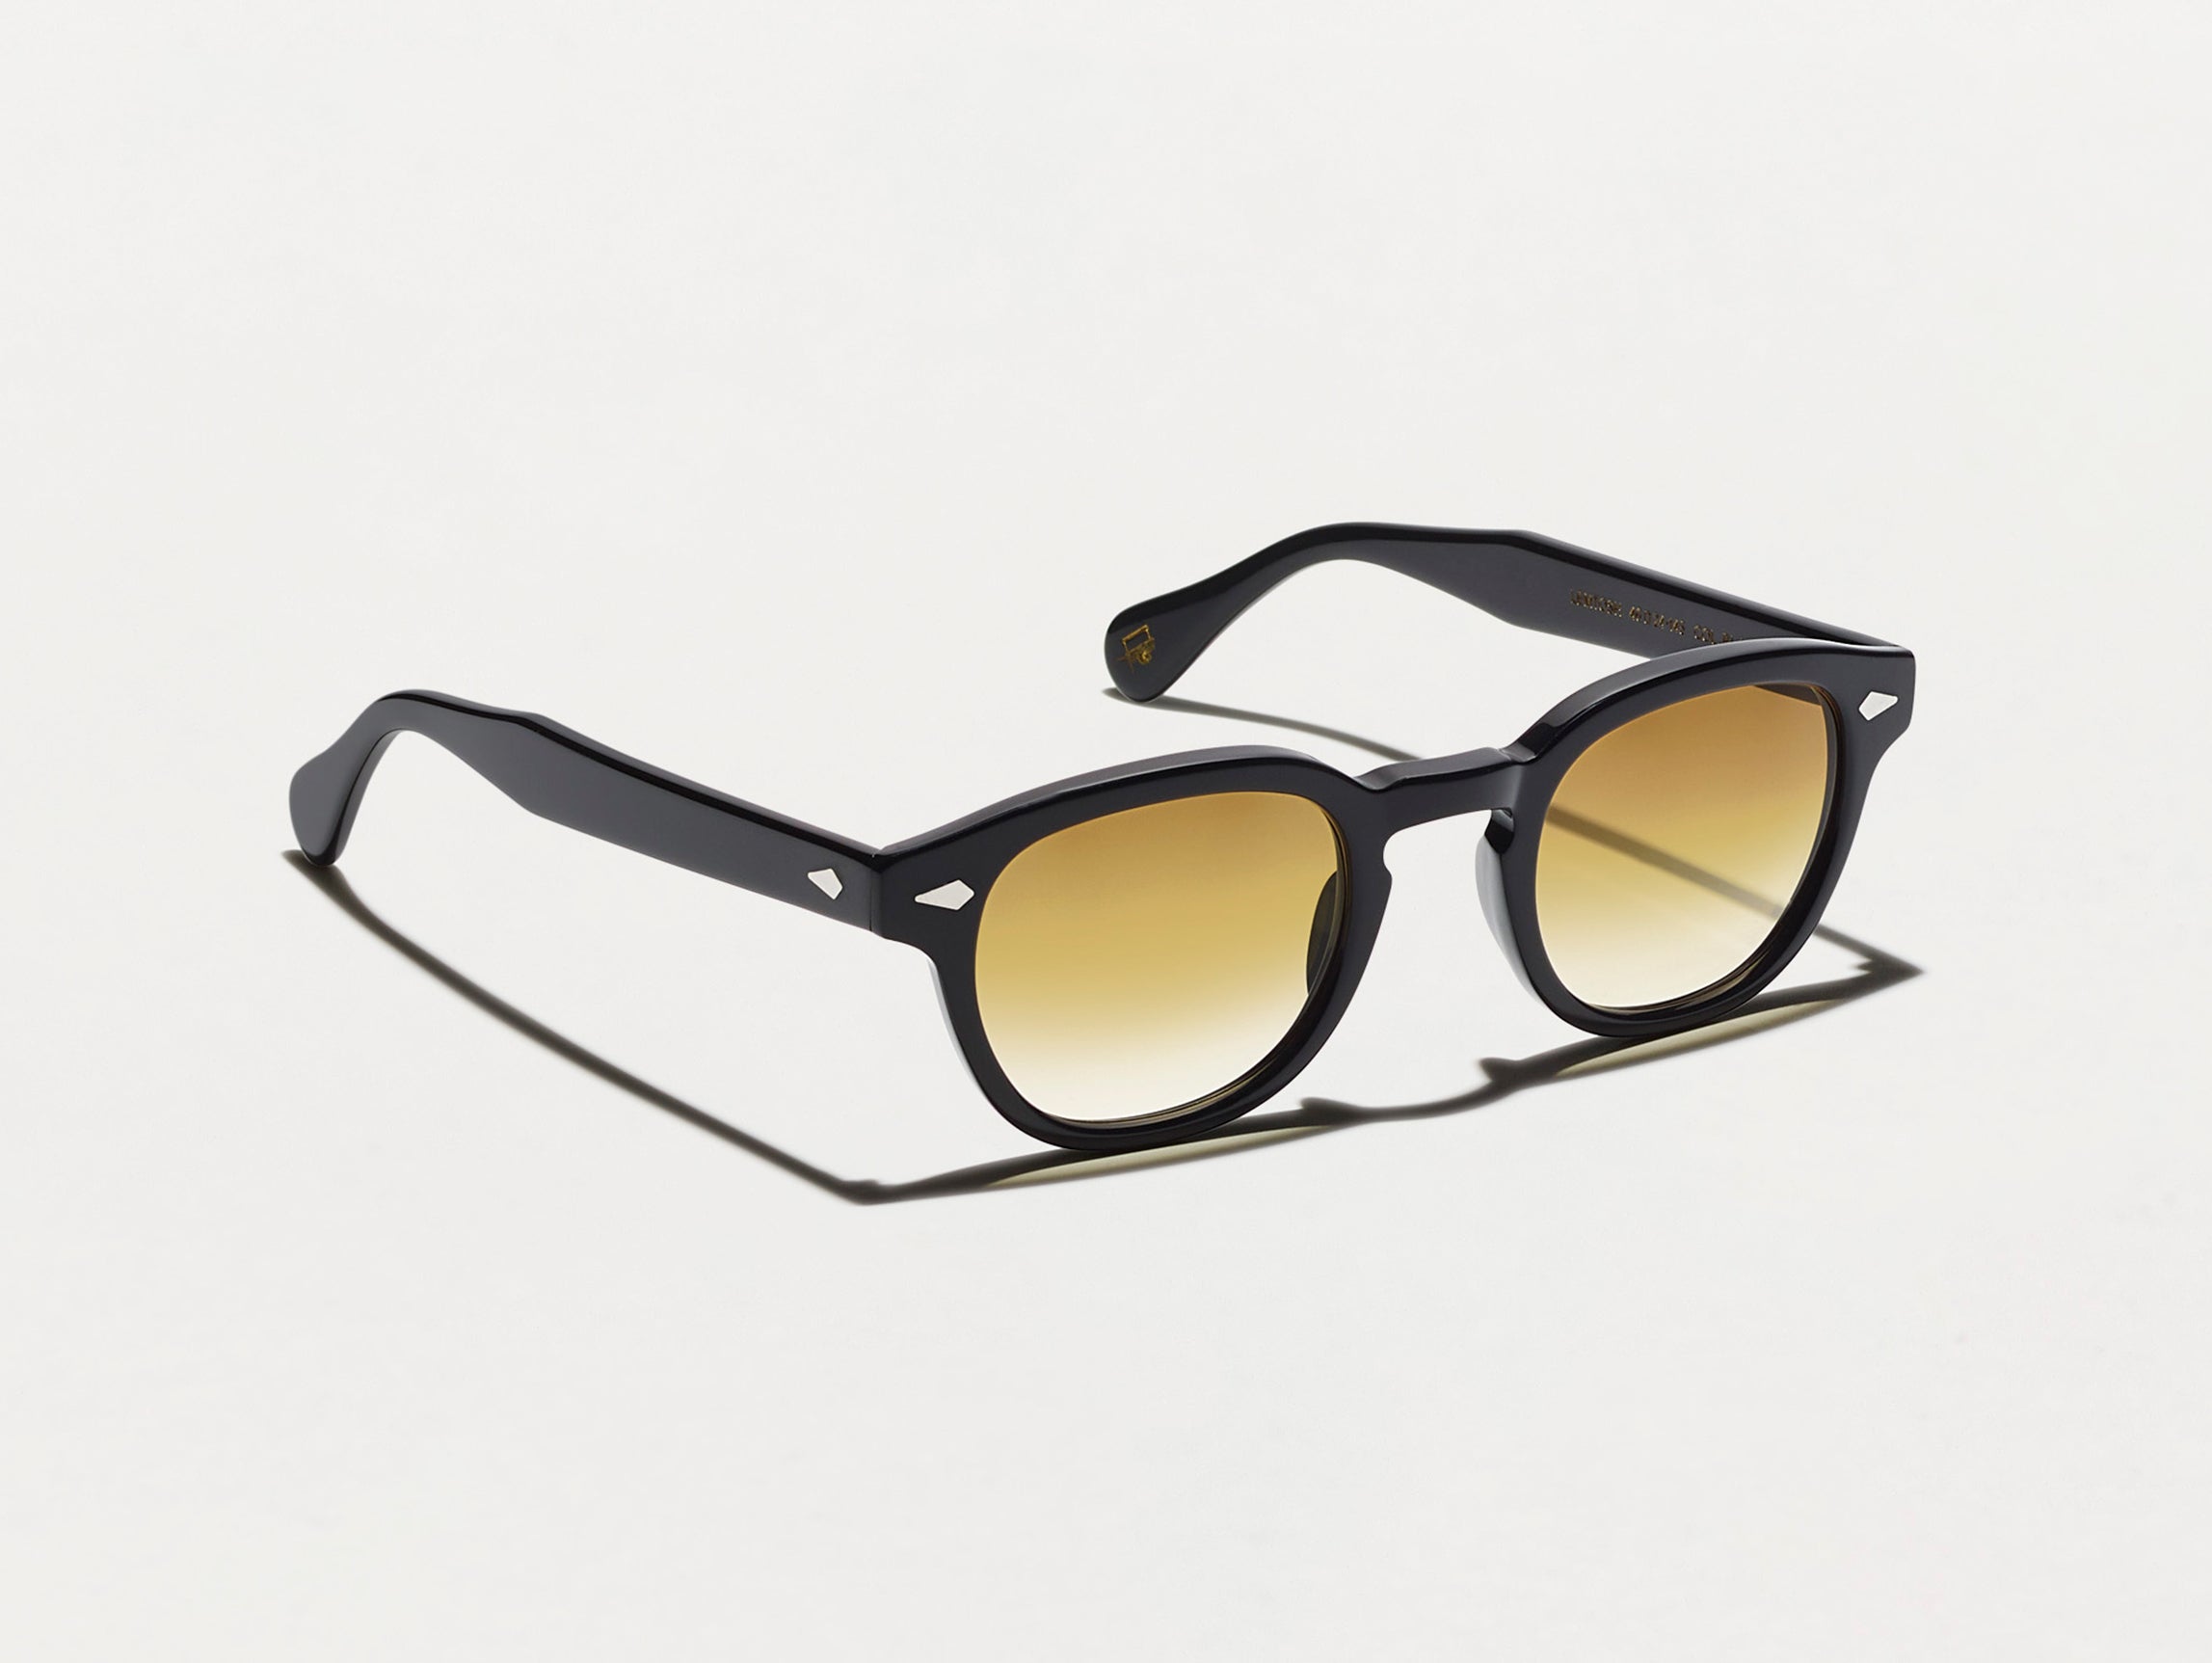 #color_chestnut fade | The LEMTOSH Black with Chestnut Fade Tinted Lenses